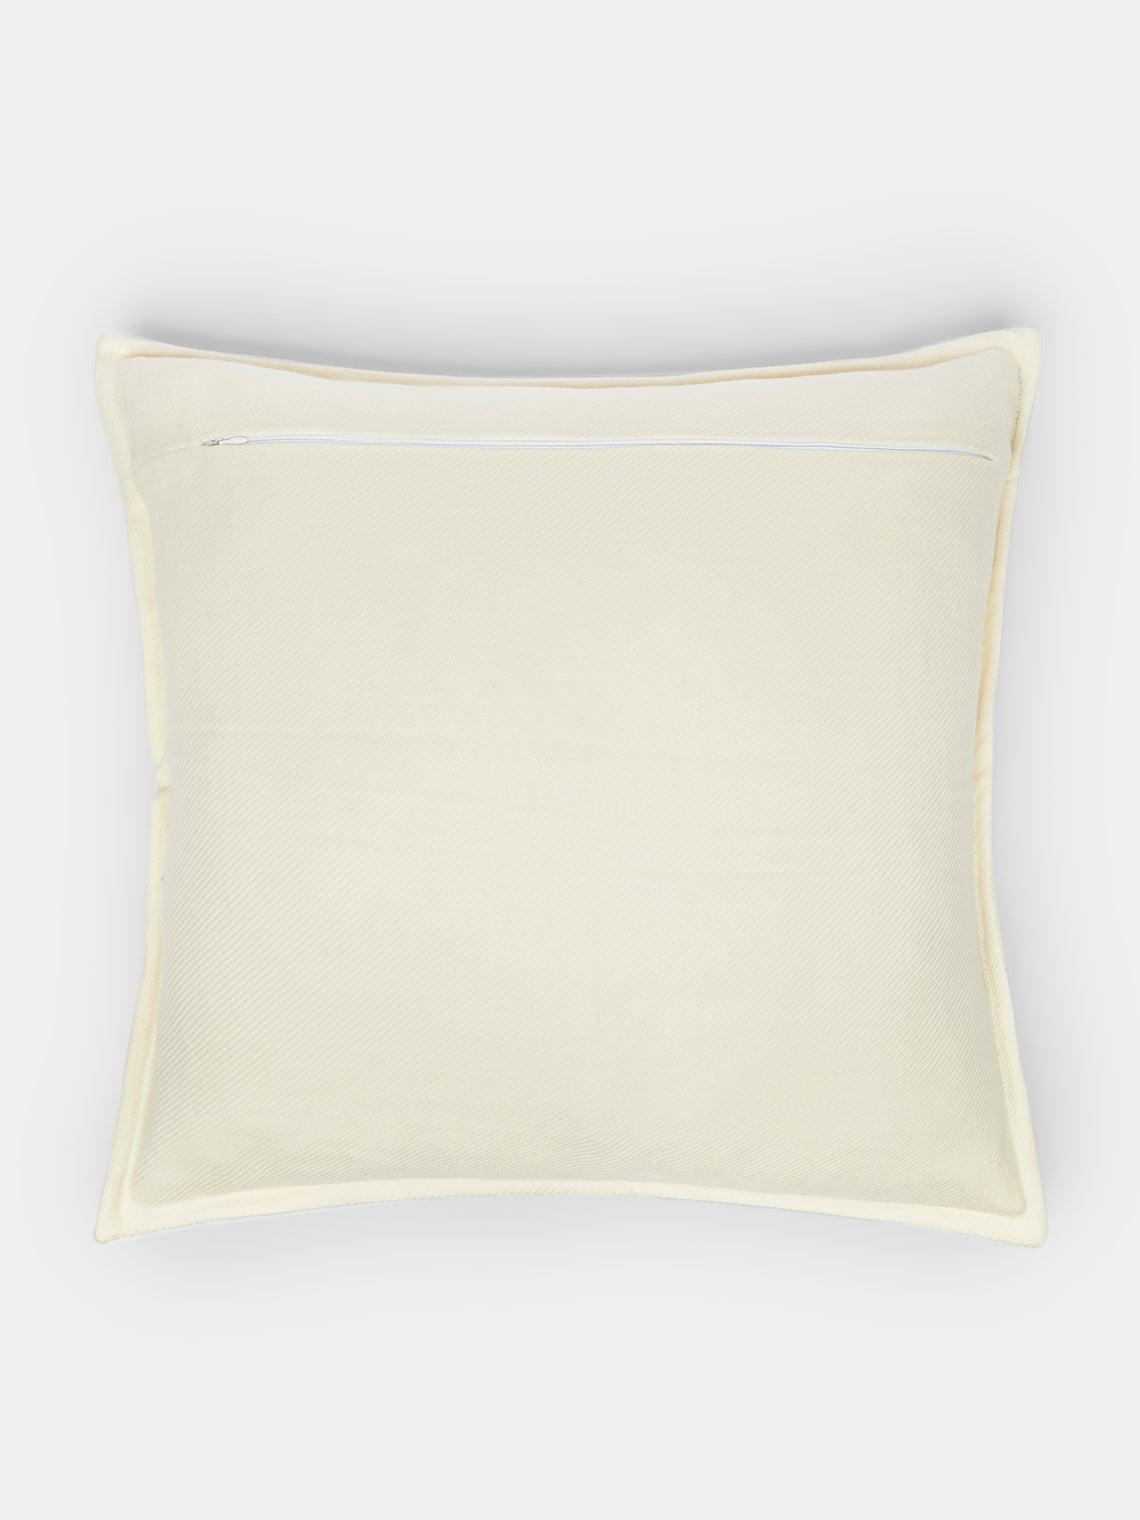 Saved NY - Basket Cashmere Pillow - Yellow - ABASK